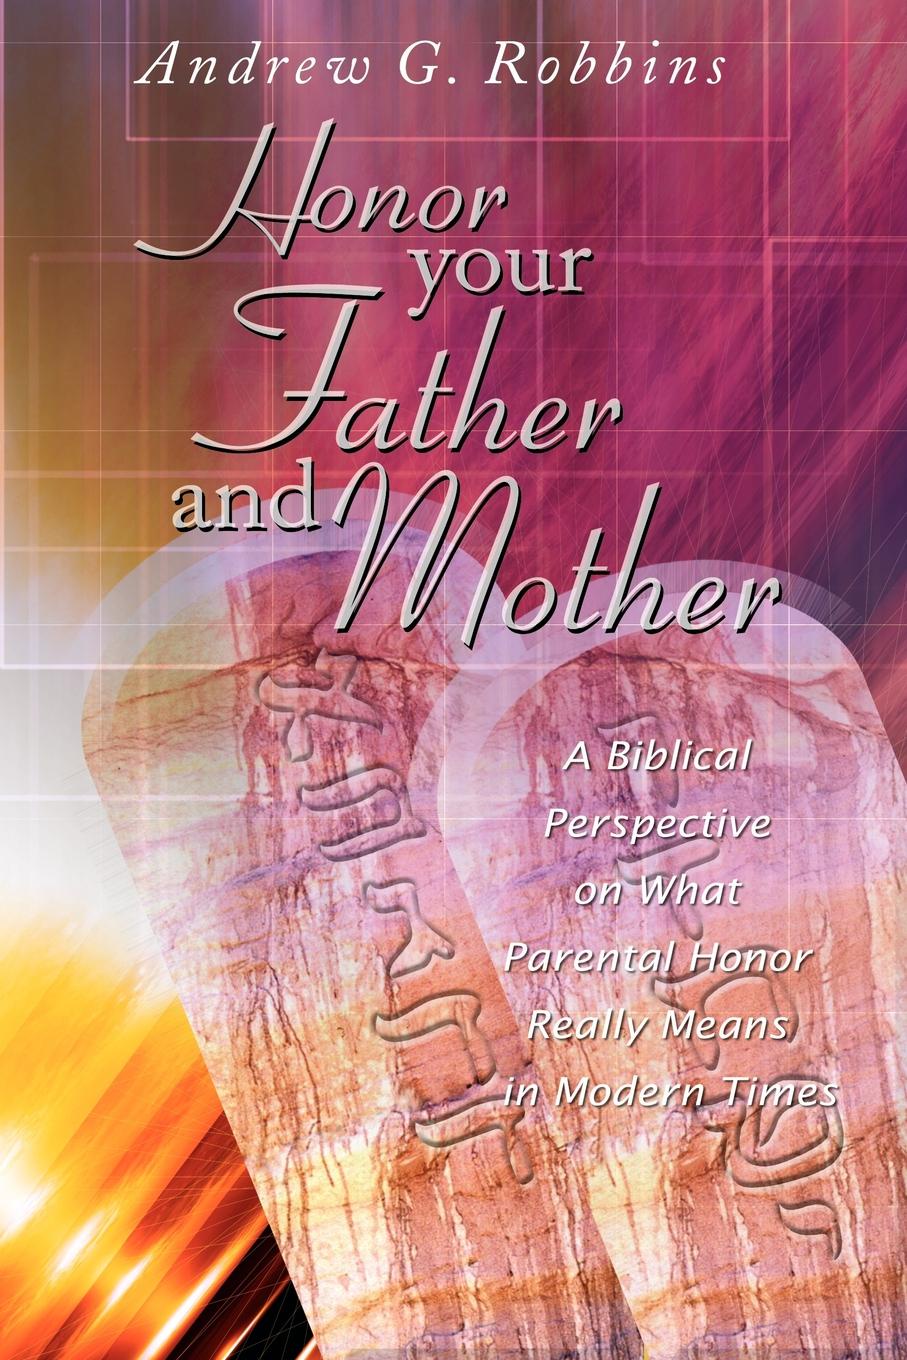 Honor Your Father and Mother. A Biblical Perspective on What Parental Honor Really Means in Modern Times